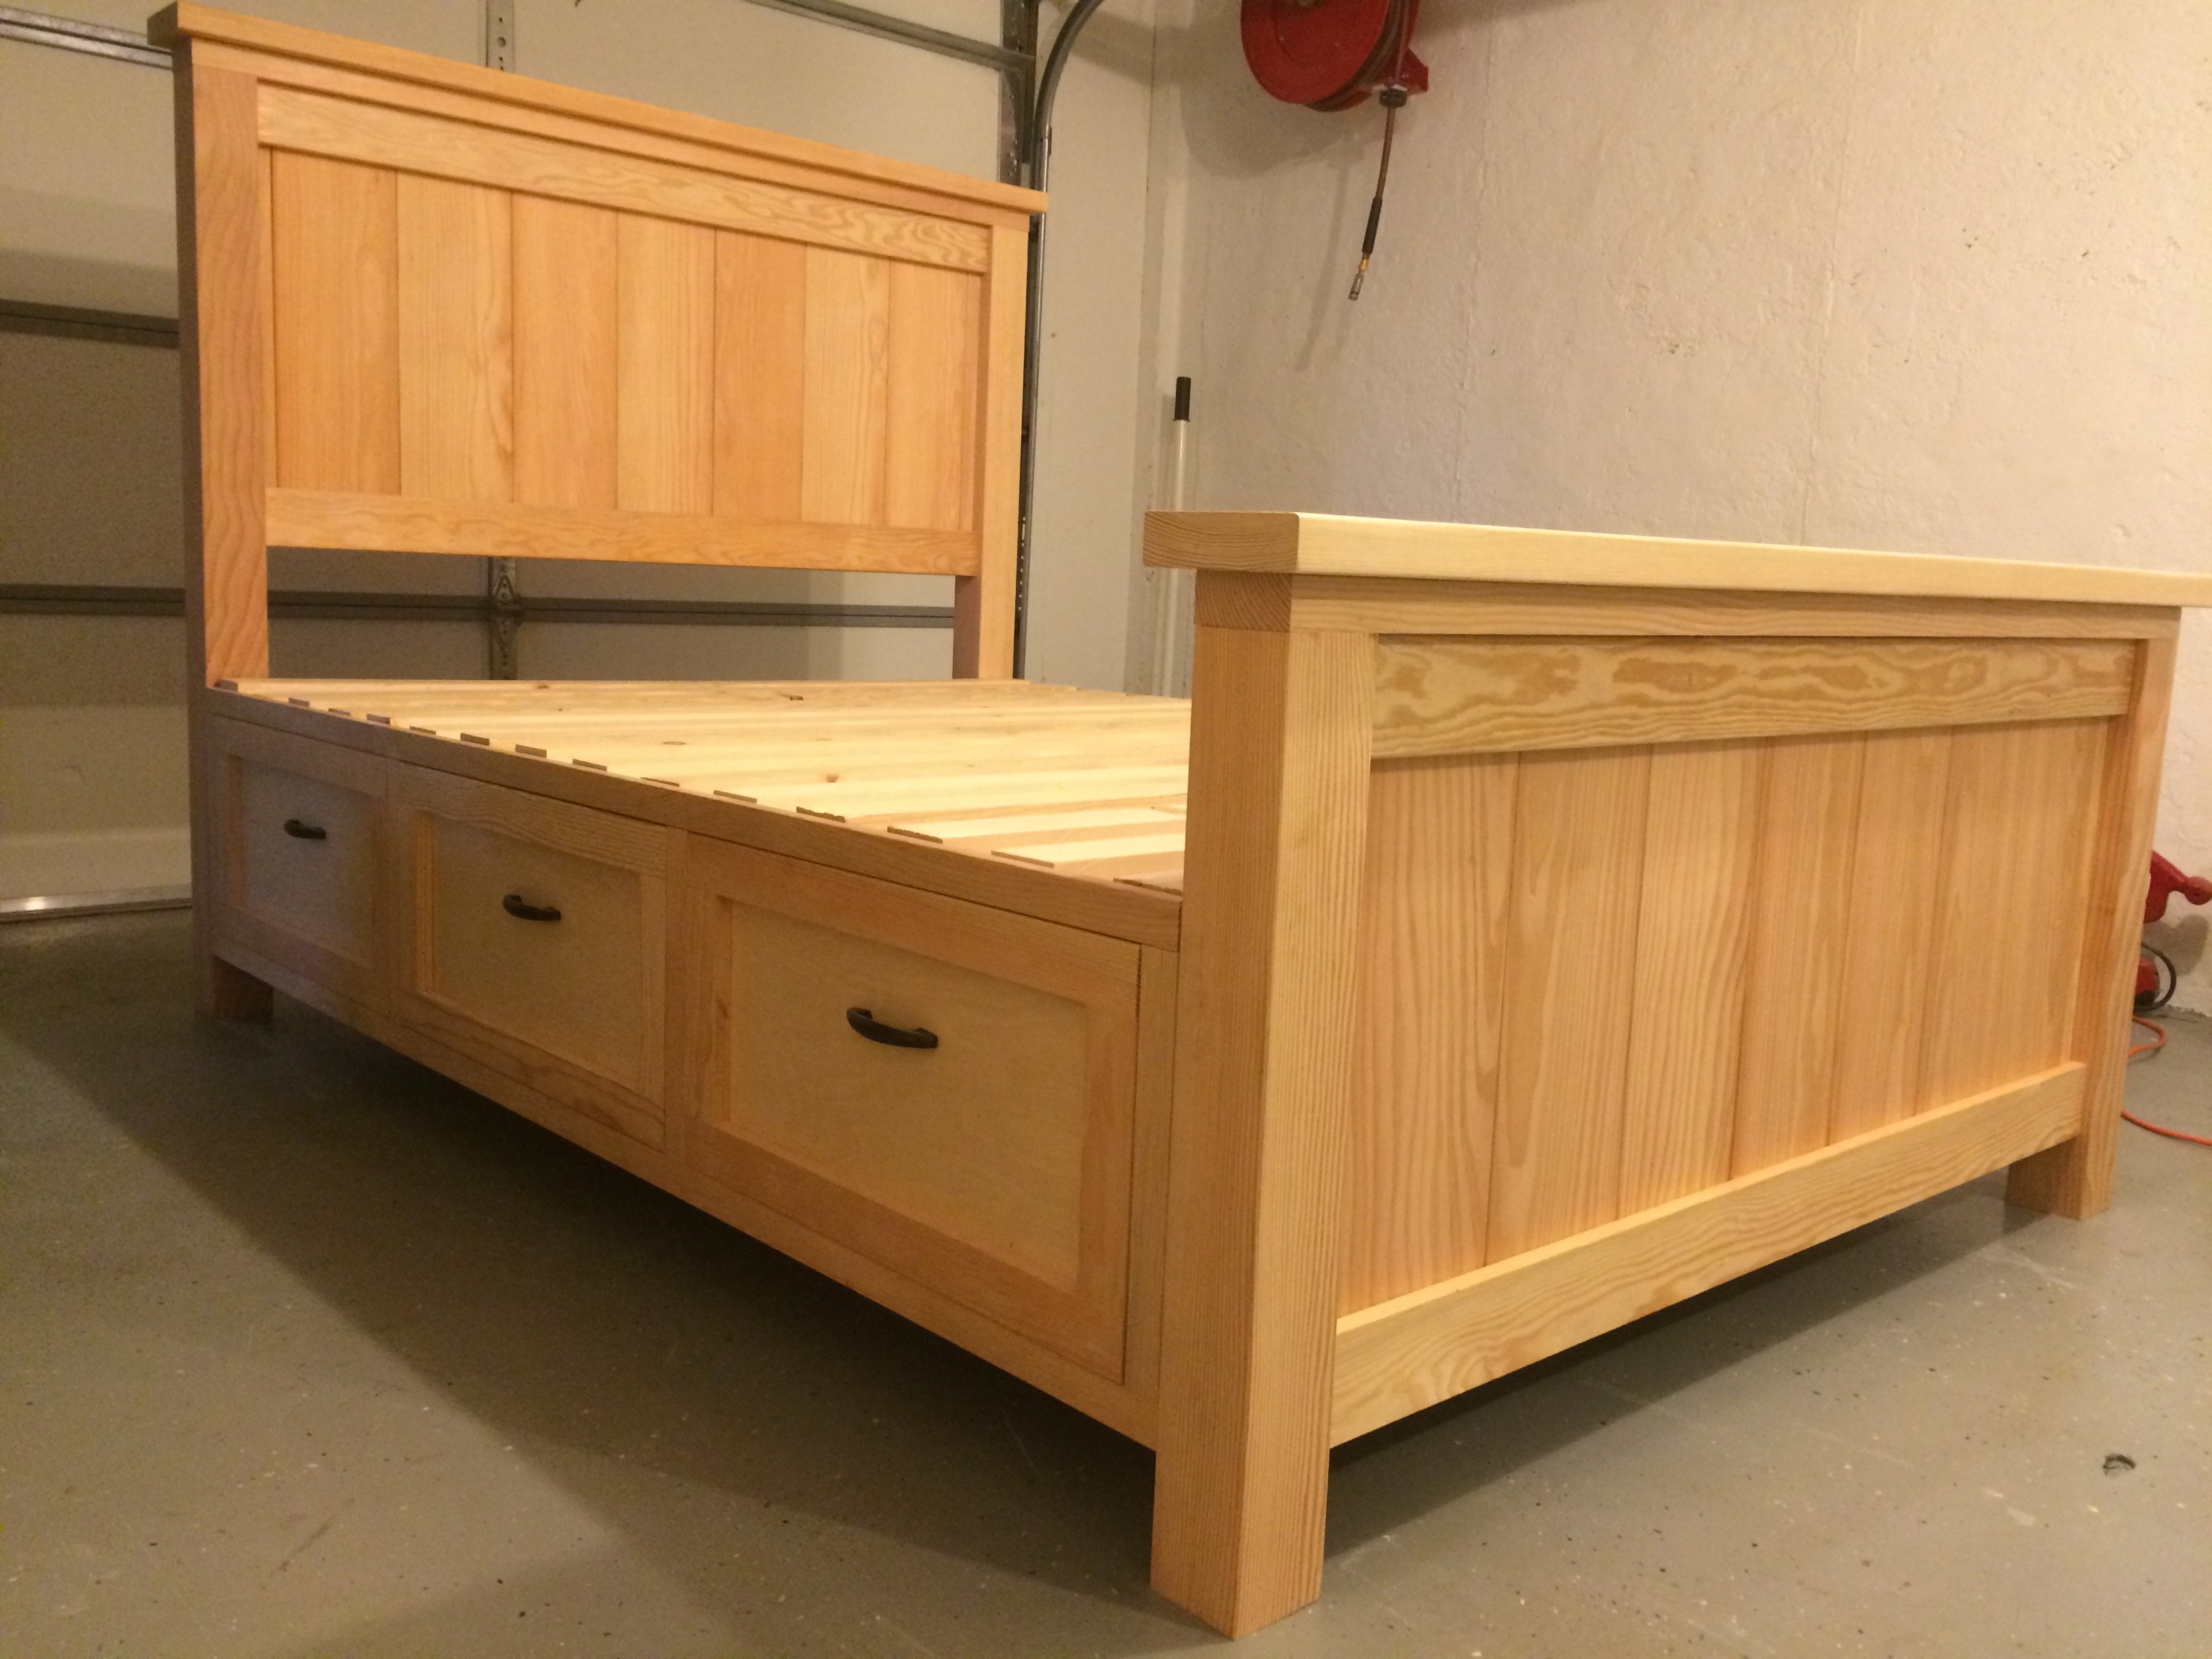 Farmhouse Storage Bed With Drawers, Queen Bed Frame With Storage Boxes